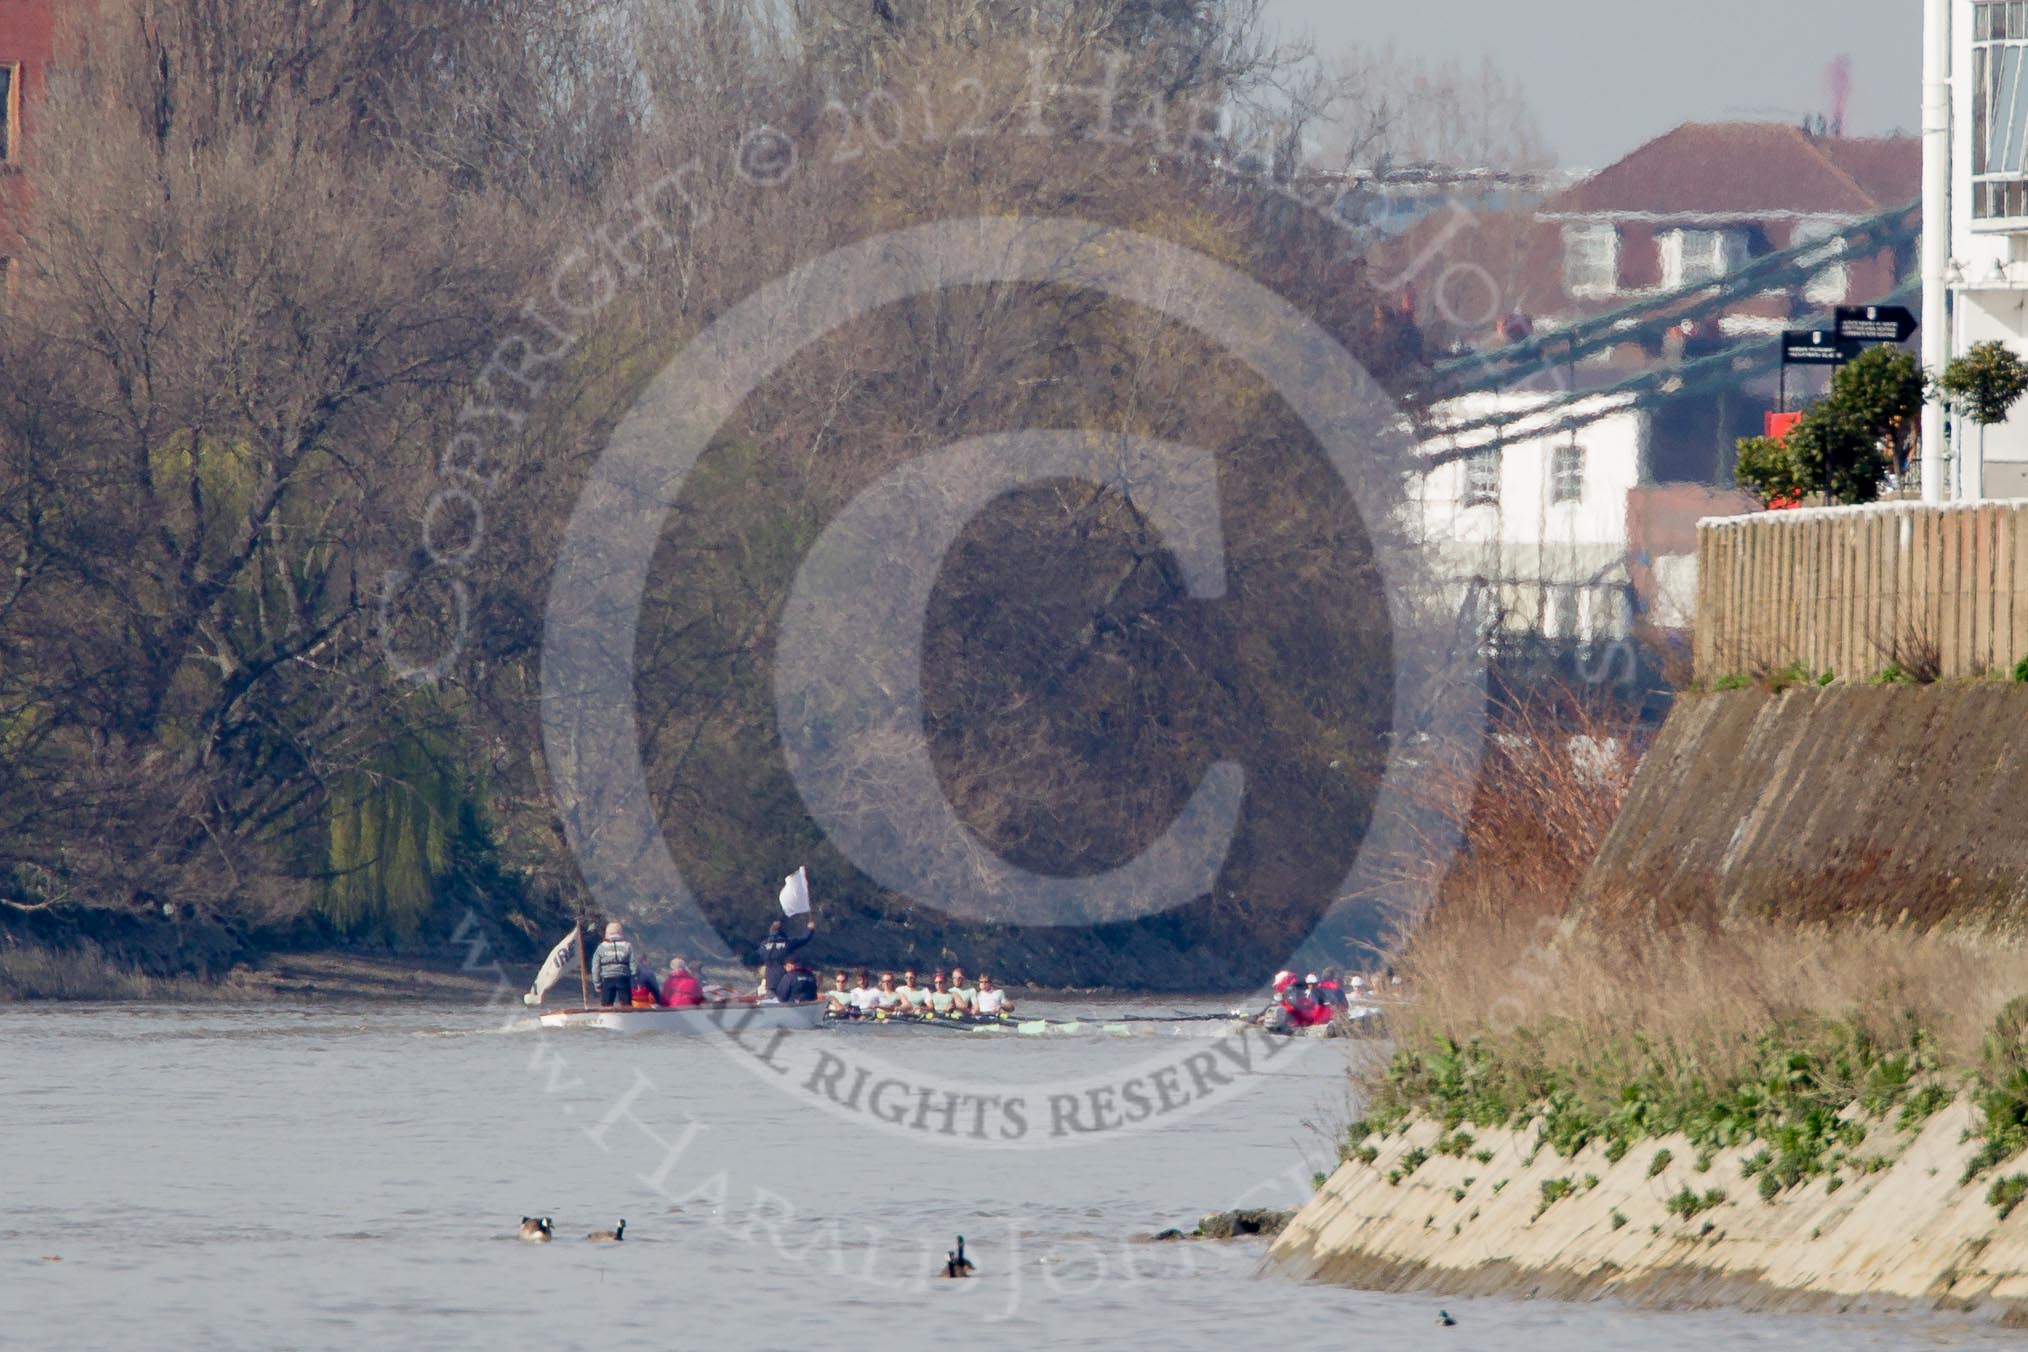 The Boat Race season 2012 - fixture CUBC vs Molesey BC: The CUBC Blue Boat on the left, the Molesey BC Eight on the right, behind them umpire Boris Rankov. The boats are approaching Hammersmith Bridge, Fulham FC stadium is on the right..




on 25 March 2012 at 15:22, image #151